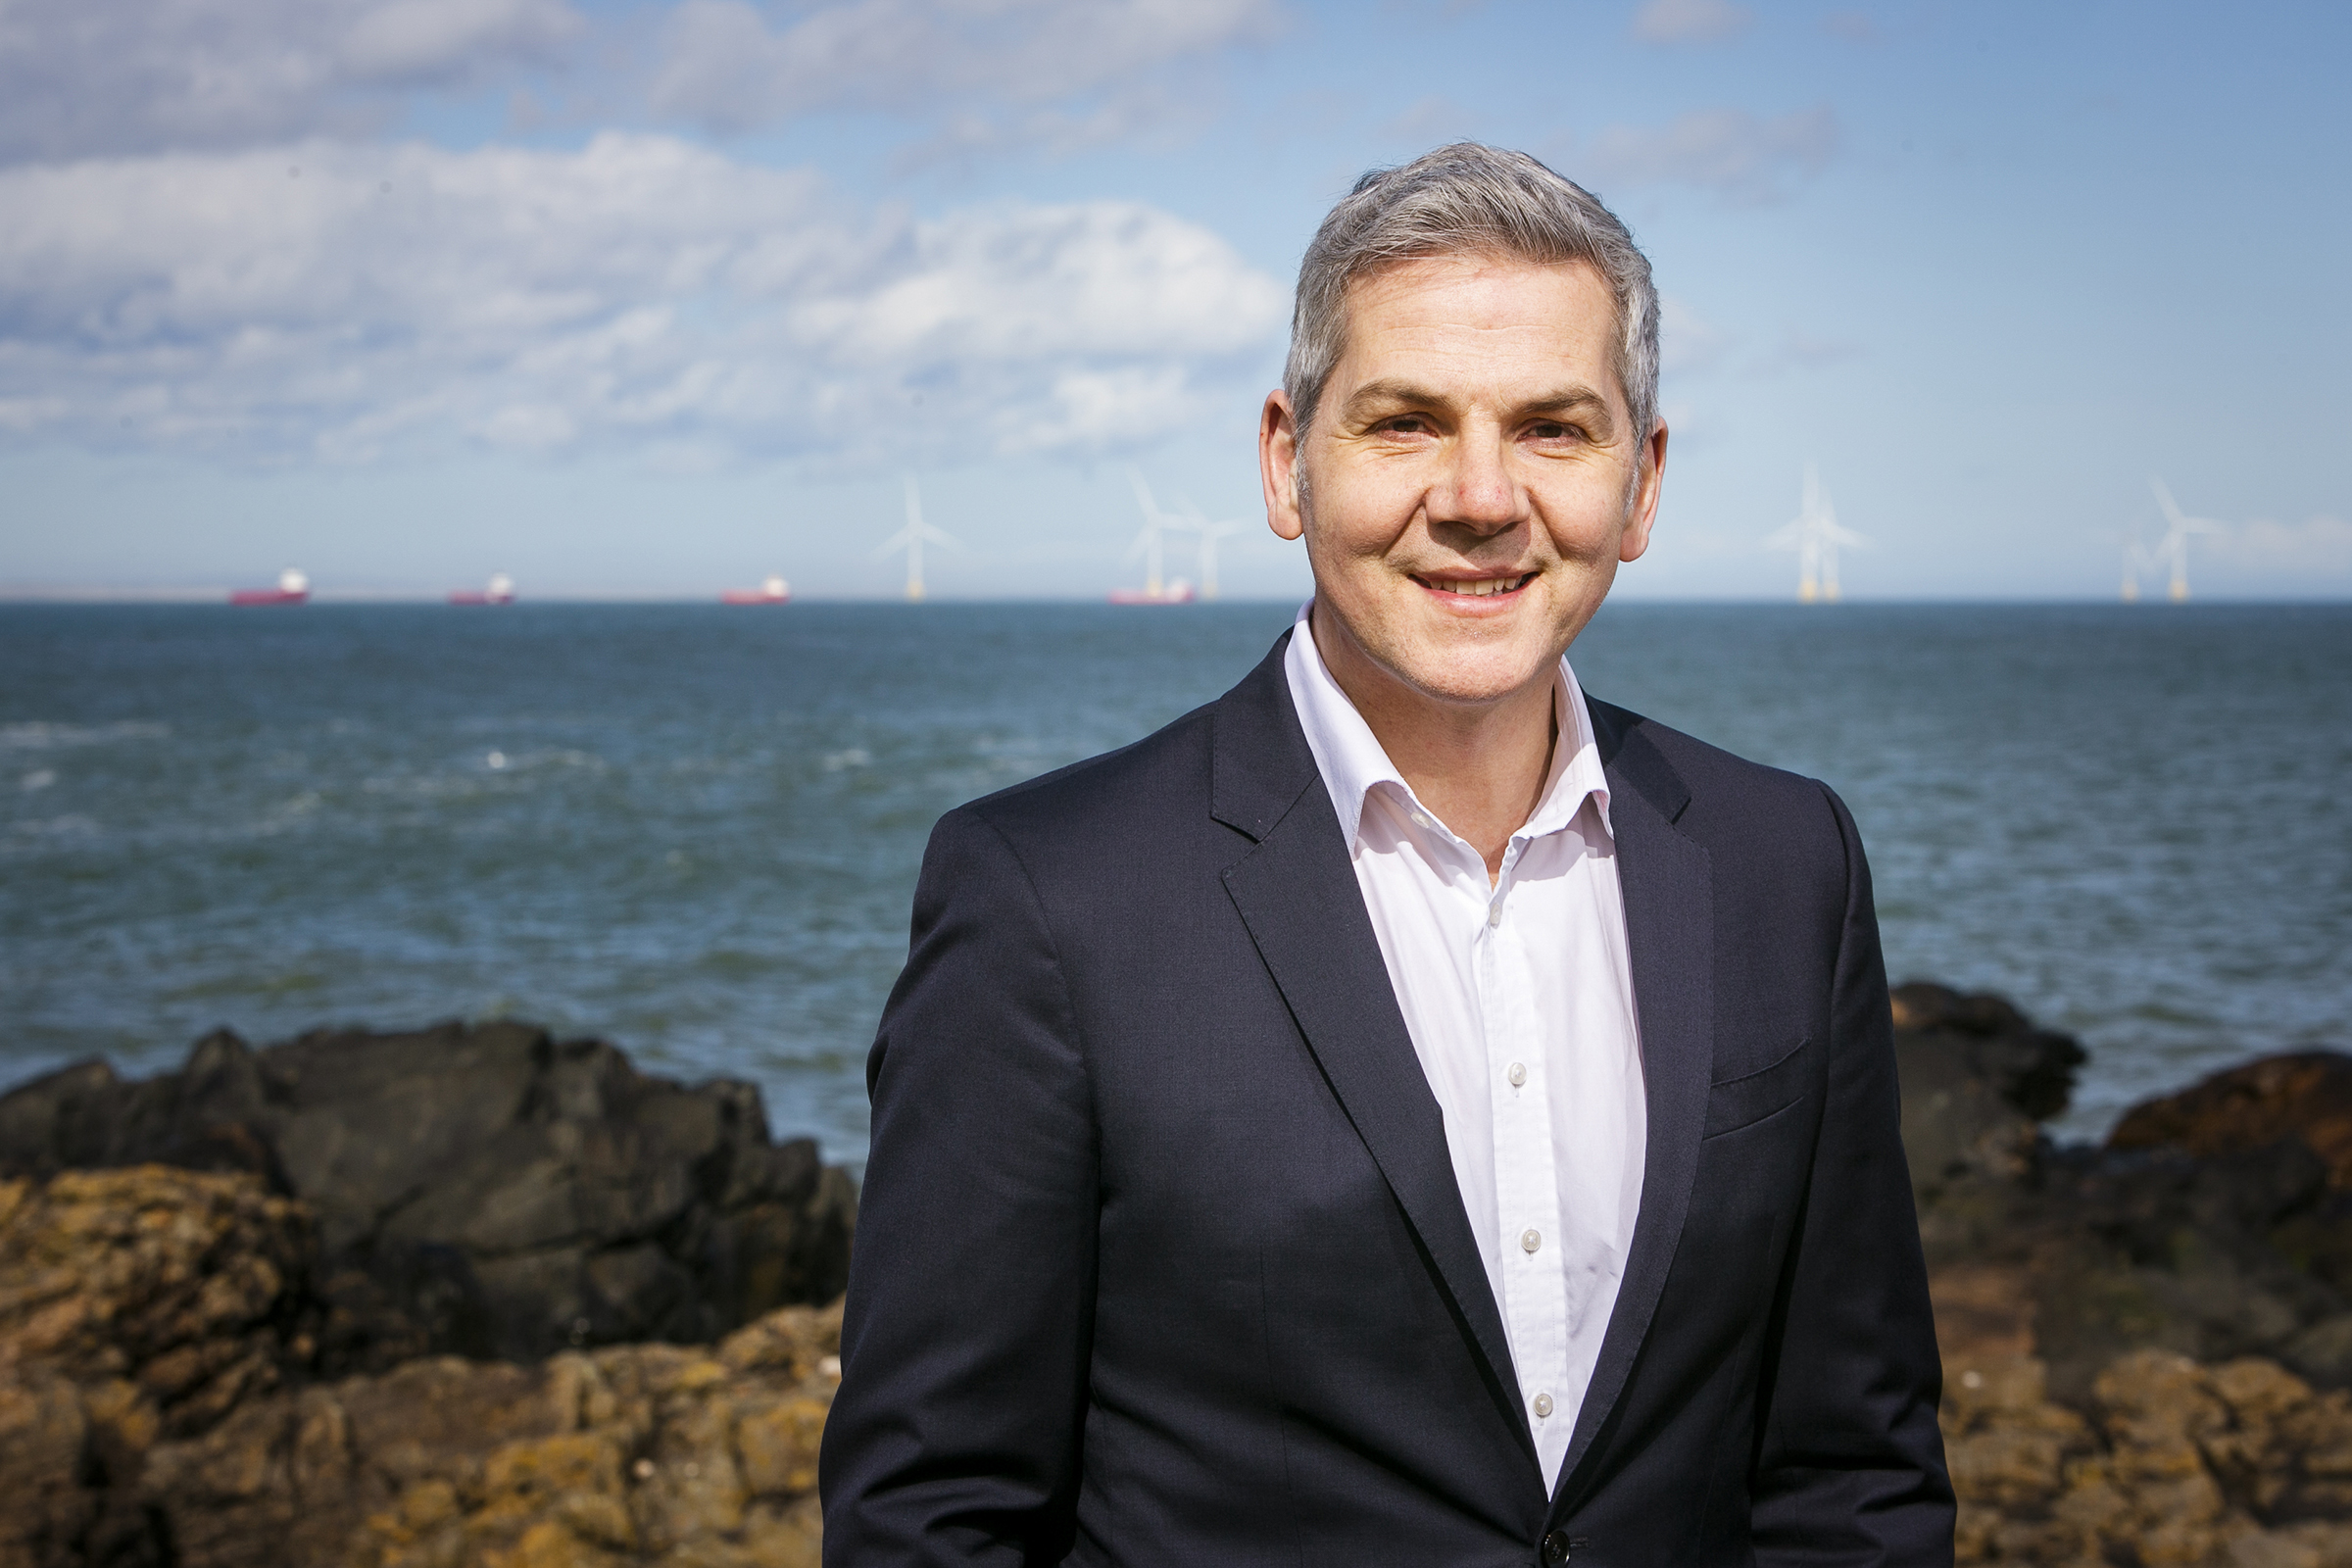 Rovco's new COO comes from Mermaid Subsea Services